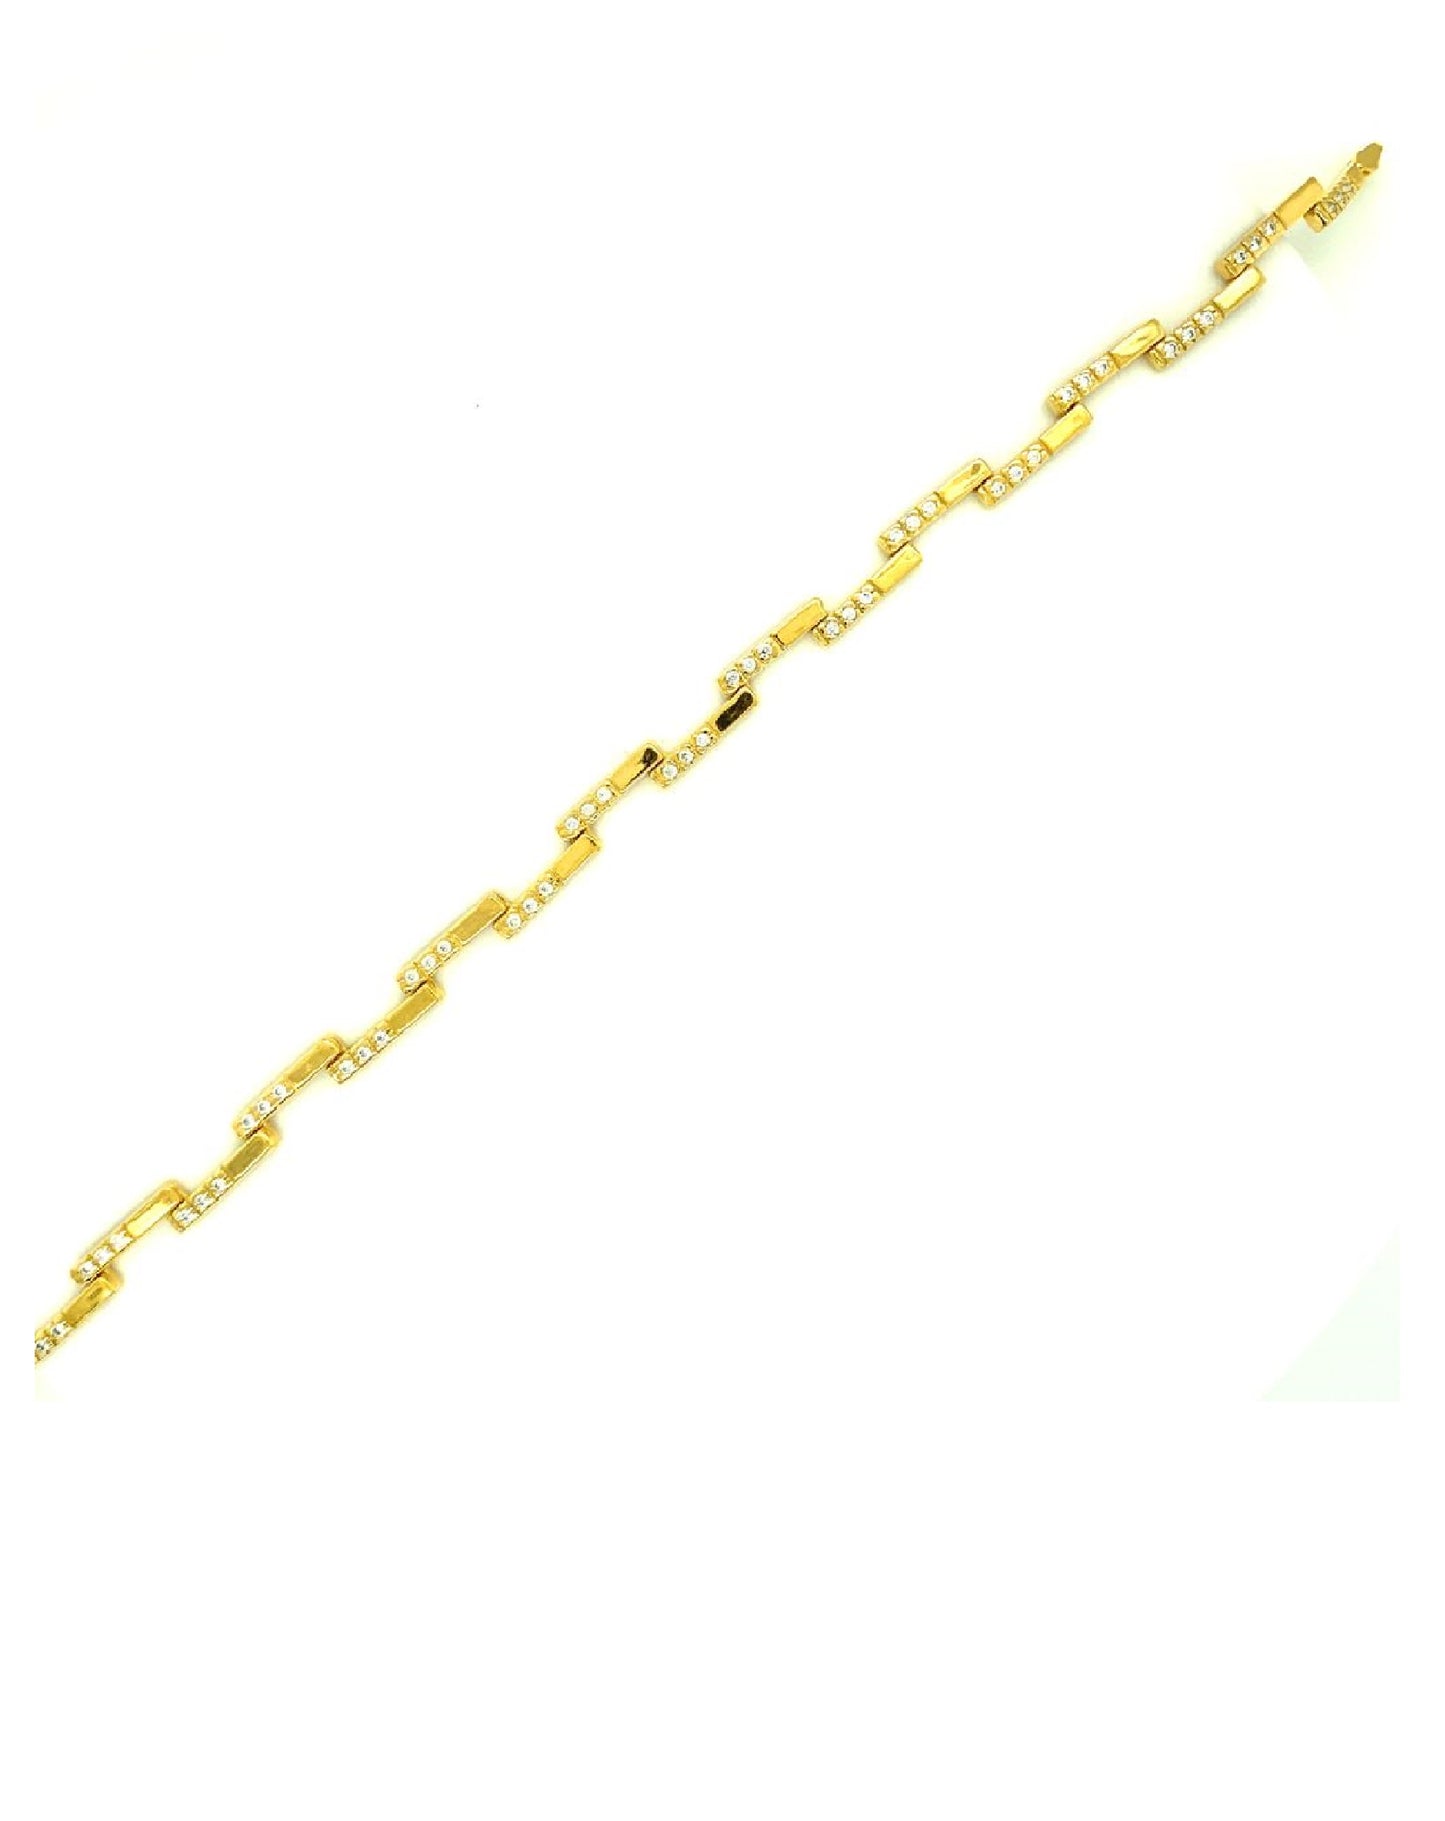 Gold 18 Kt Yellow Gold Chic Bracelet Jewelry